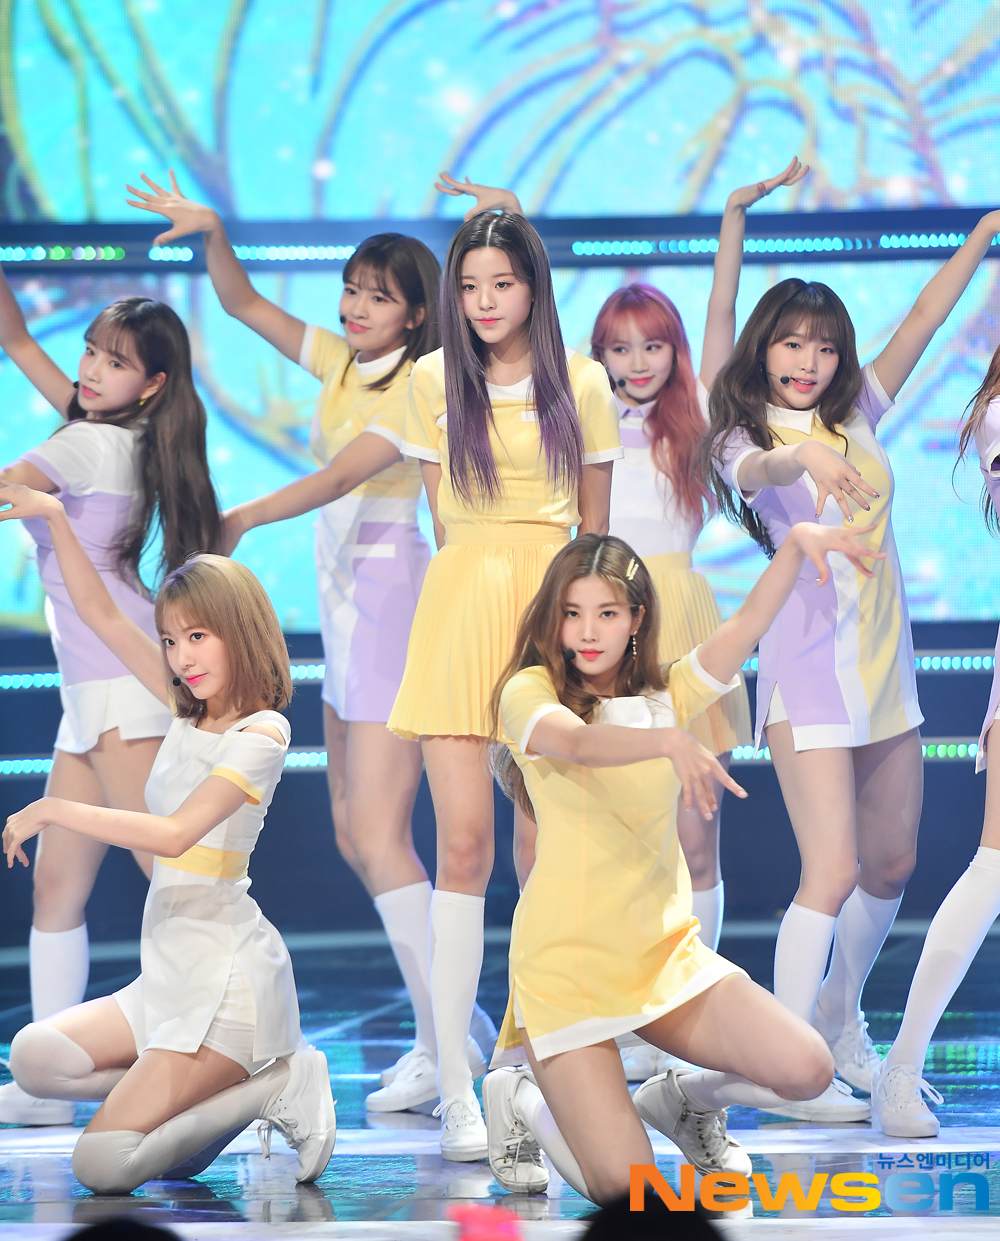 Girl group IZWAN is performing on MBC music live broadcast Show Champion held at MBC Dream Center in Ilsan, Janghang-dong, Ilsan-dong, Goyang-si, Gyeonggi-do on the afternoon of April 10th.Meanwhile, Show Champion appeared in Momoland, Eyes One, Pentagon, JBJ95, Stray Kids, VAV, Card, Everglow, Camilla, Kang Siwon, 1TEAM, Dream Note, Park Girl, Hot Place, Young Tak and Ko Seung Hyung.expressiveness